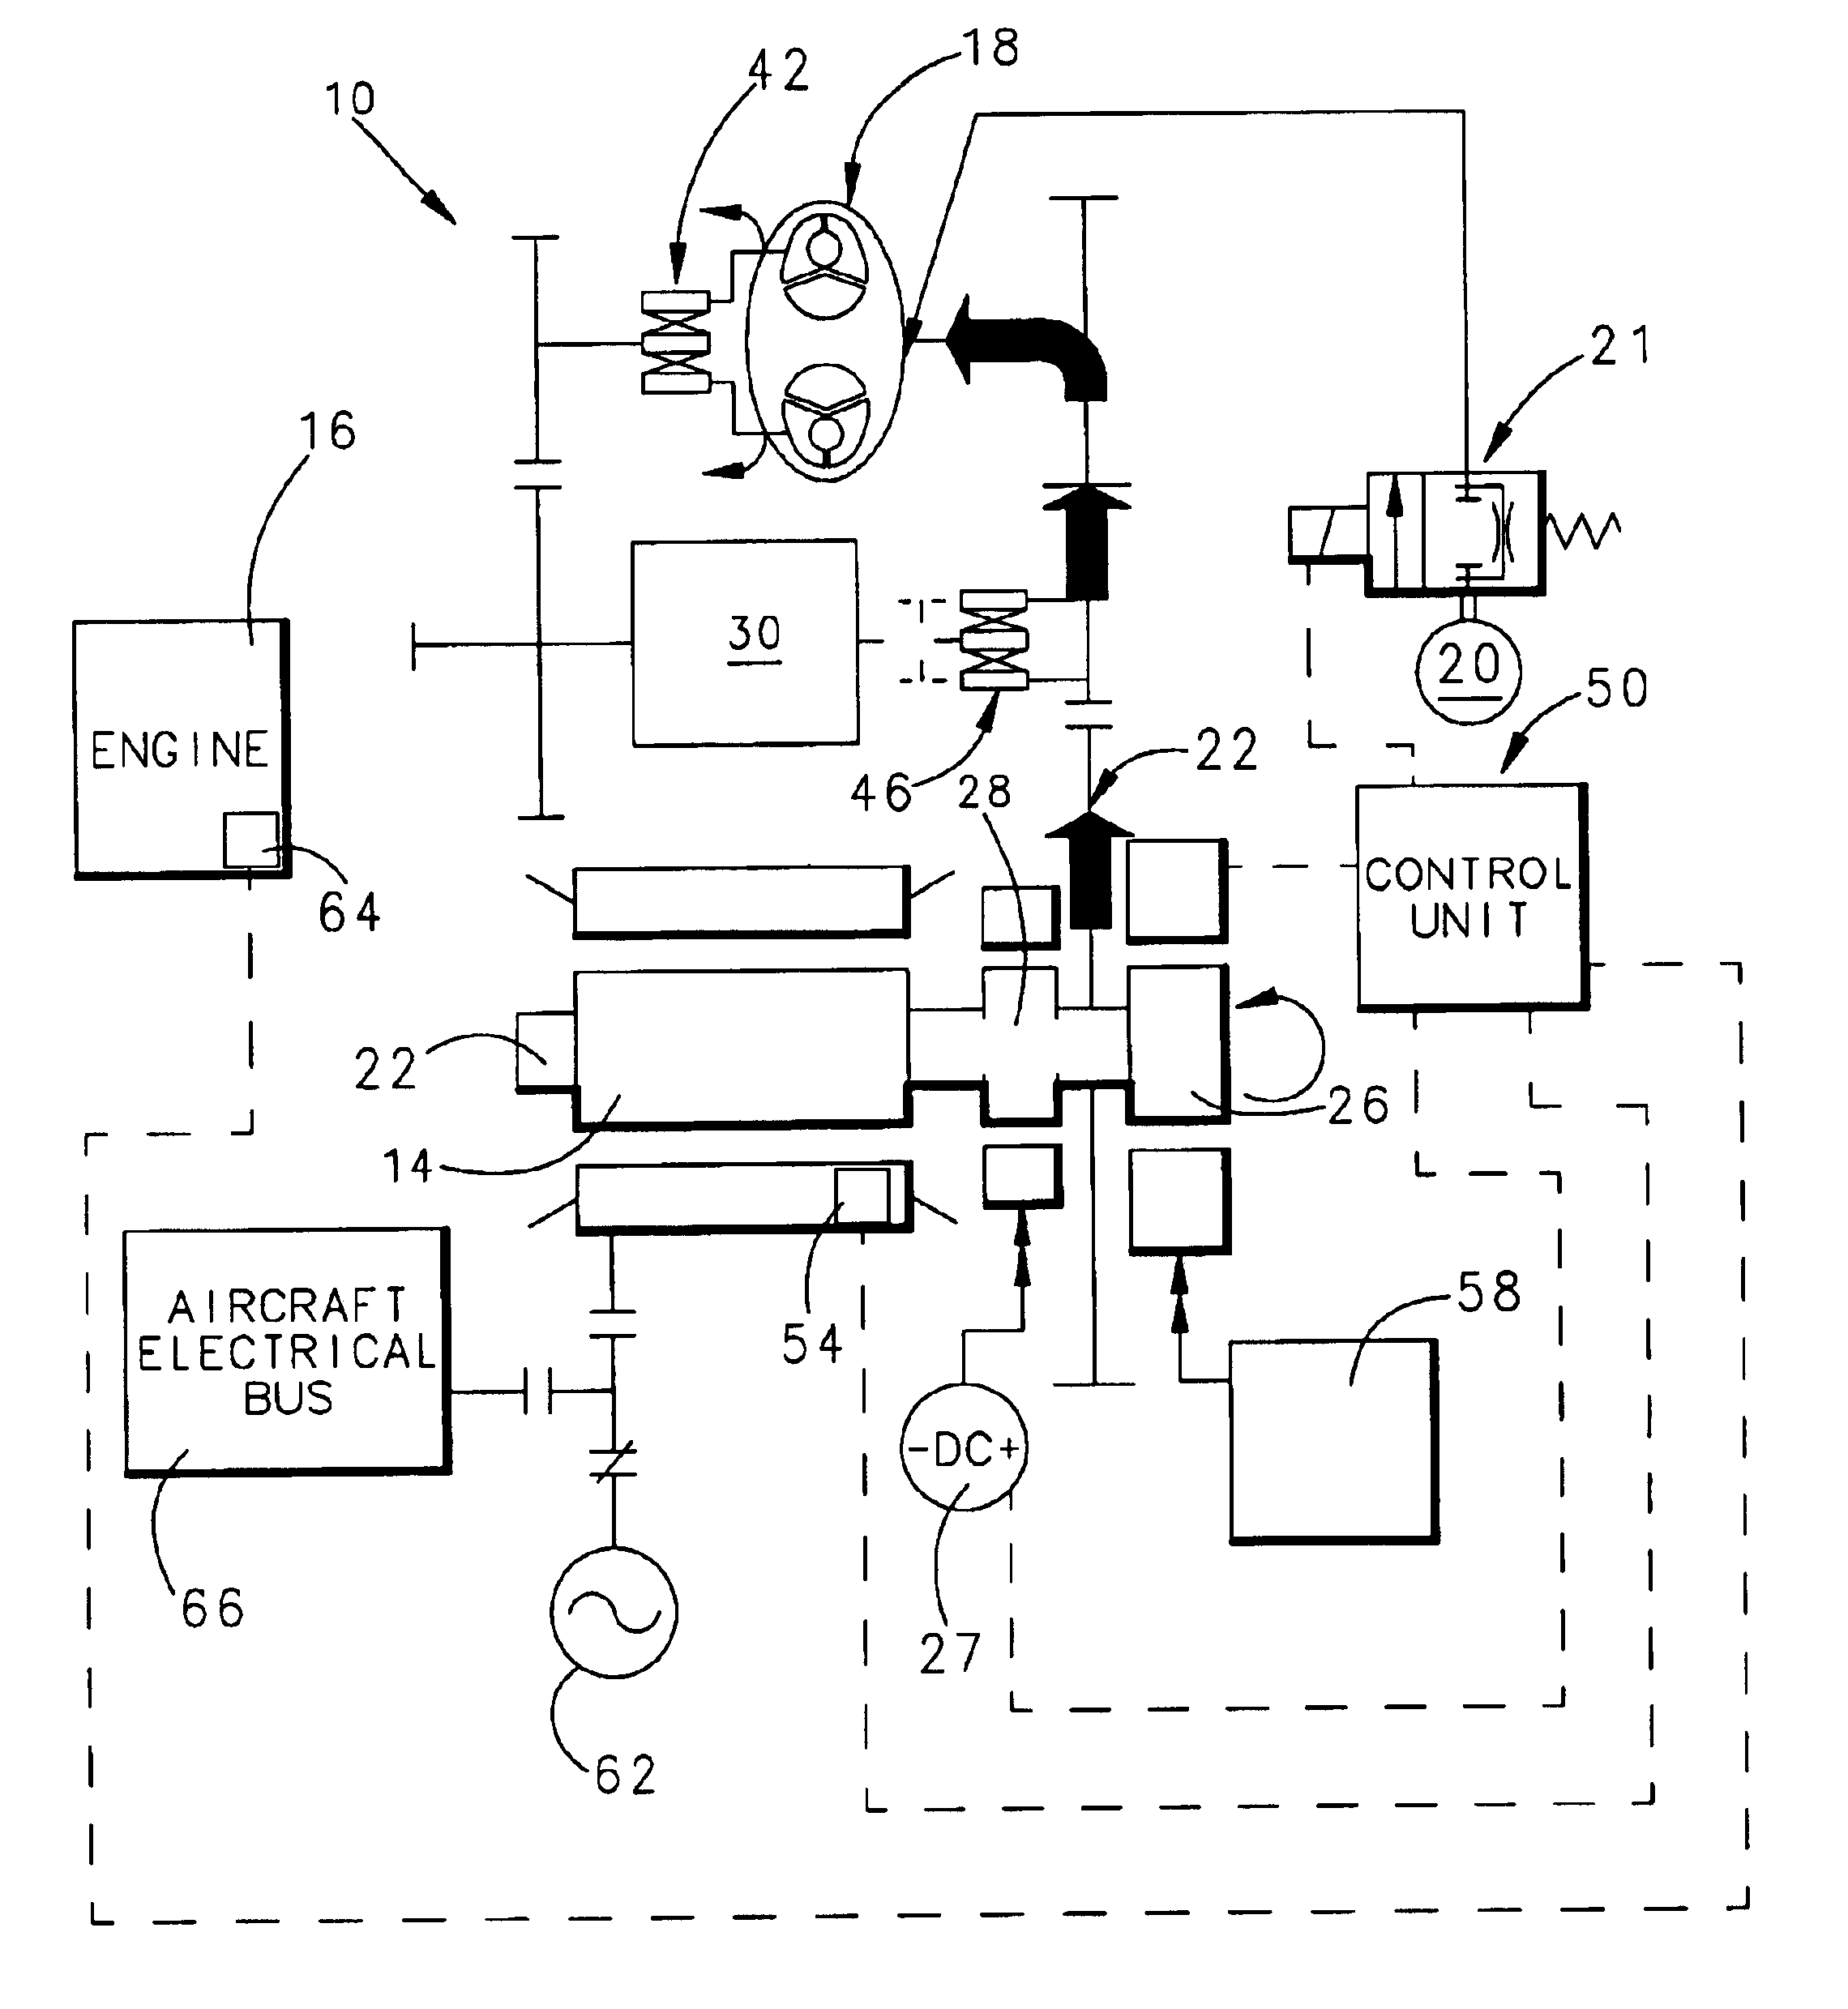 Integrated starter generator drive having selective torque converter and constant speed transmission for aircraft having a constant frequency electrical system